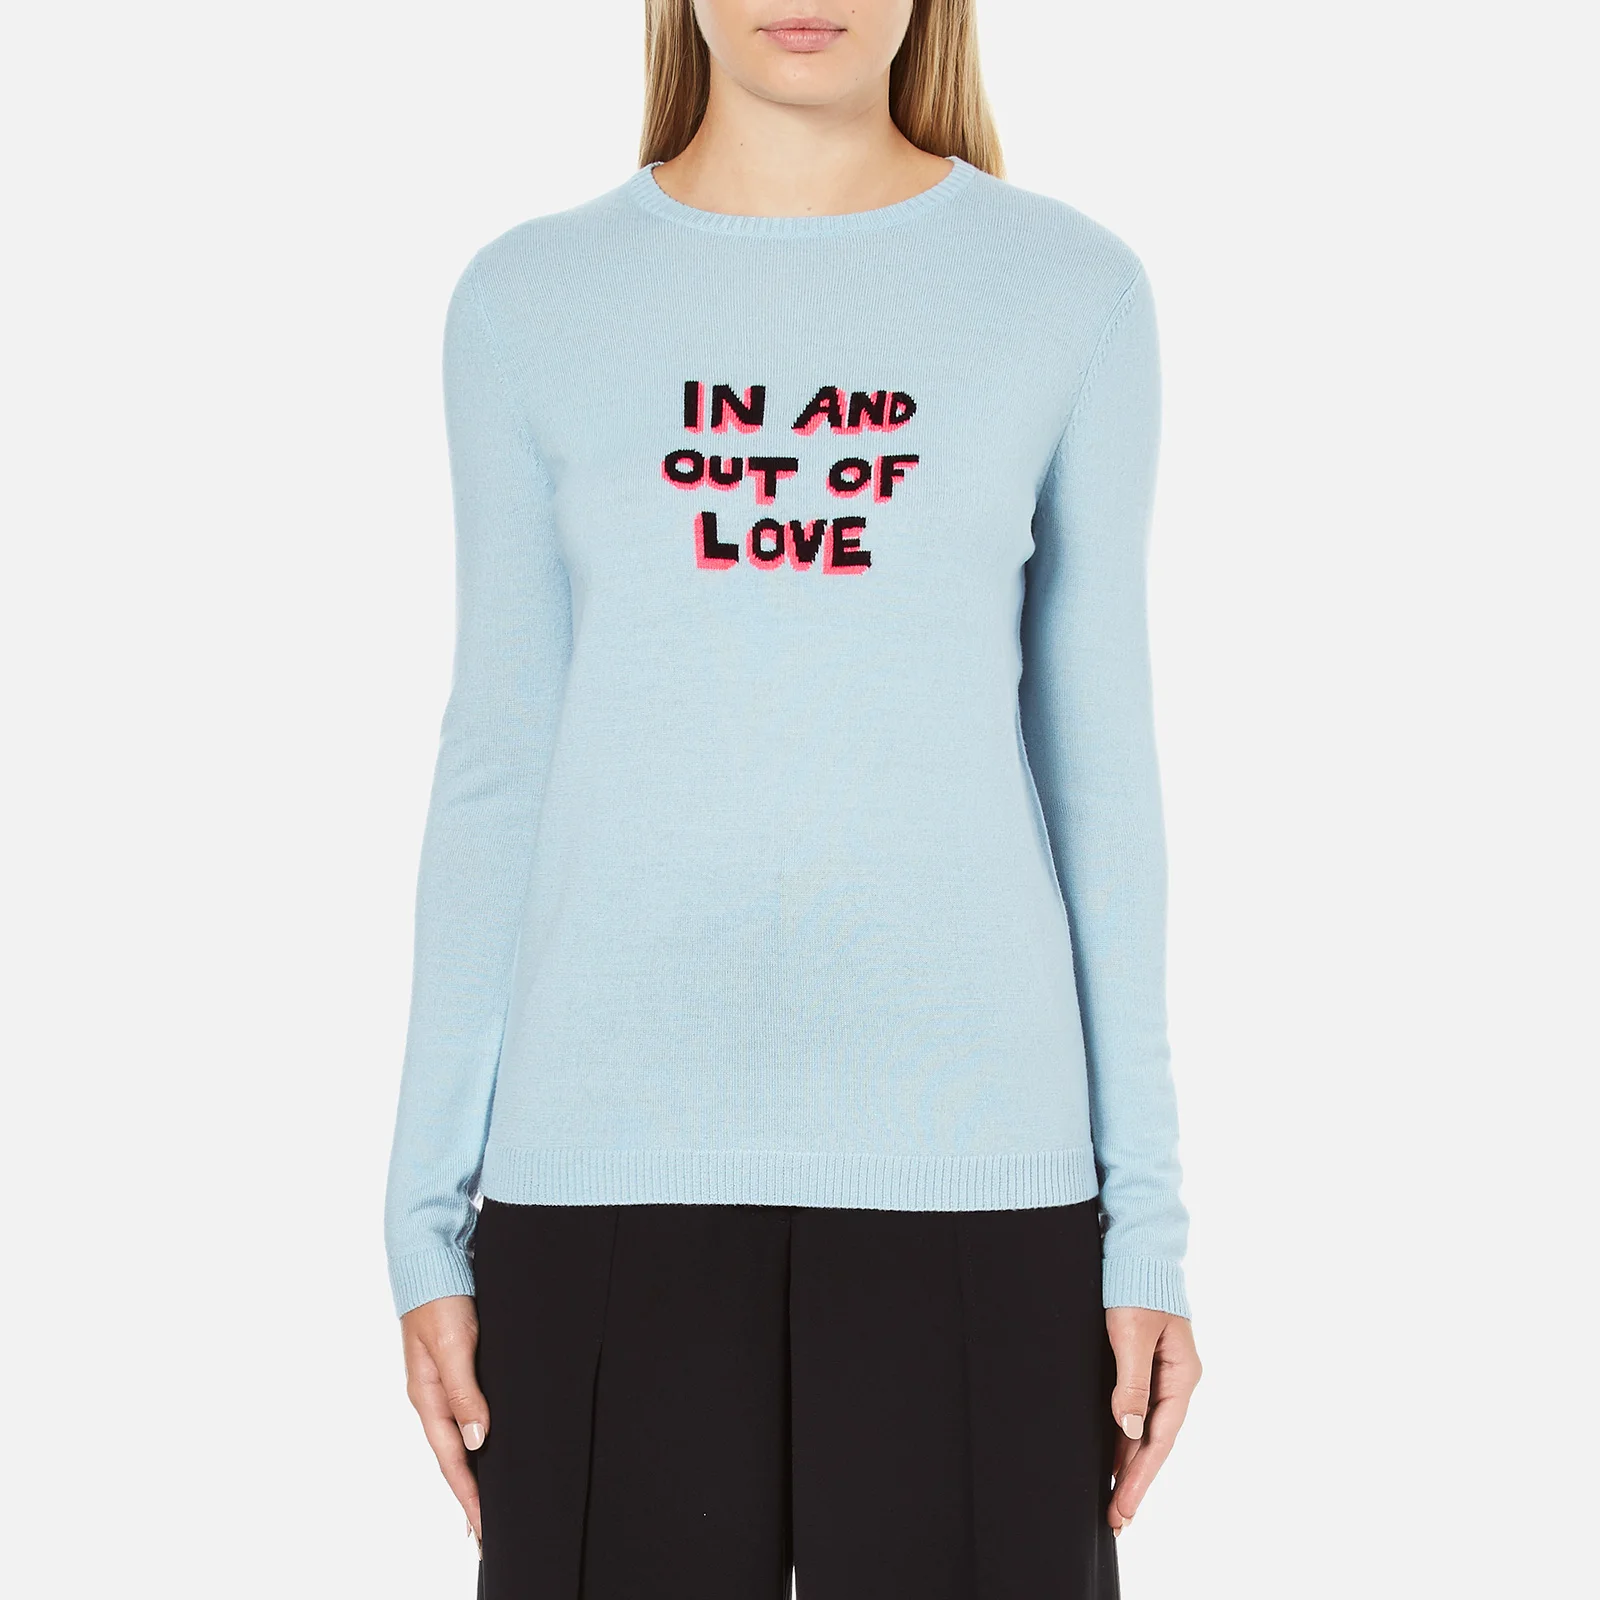 Bella Freud Women's In and Out of Love Merino Jumper - Pale Blue Image 1